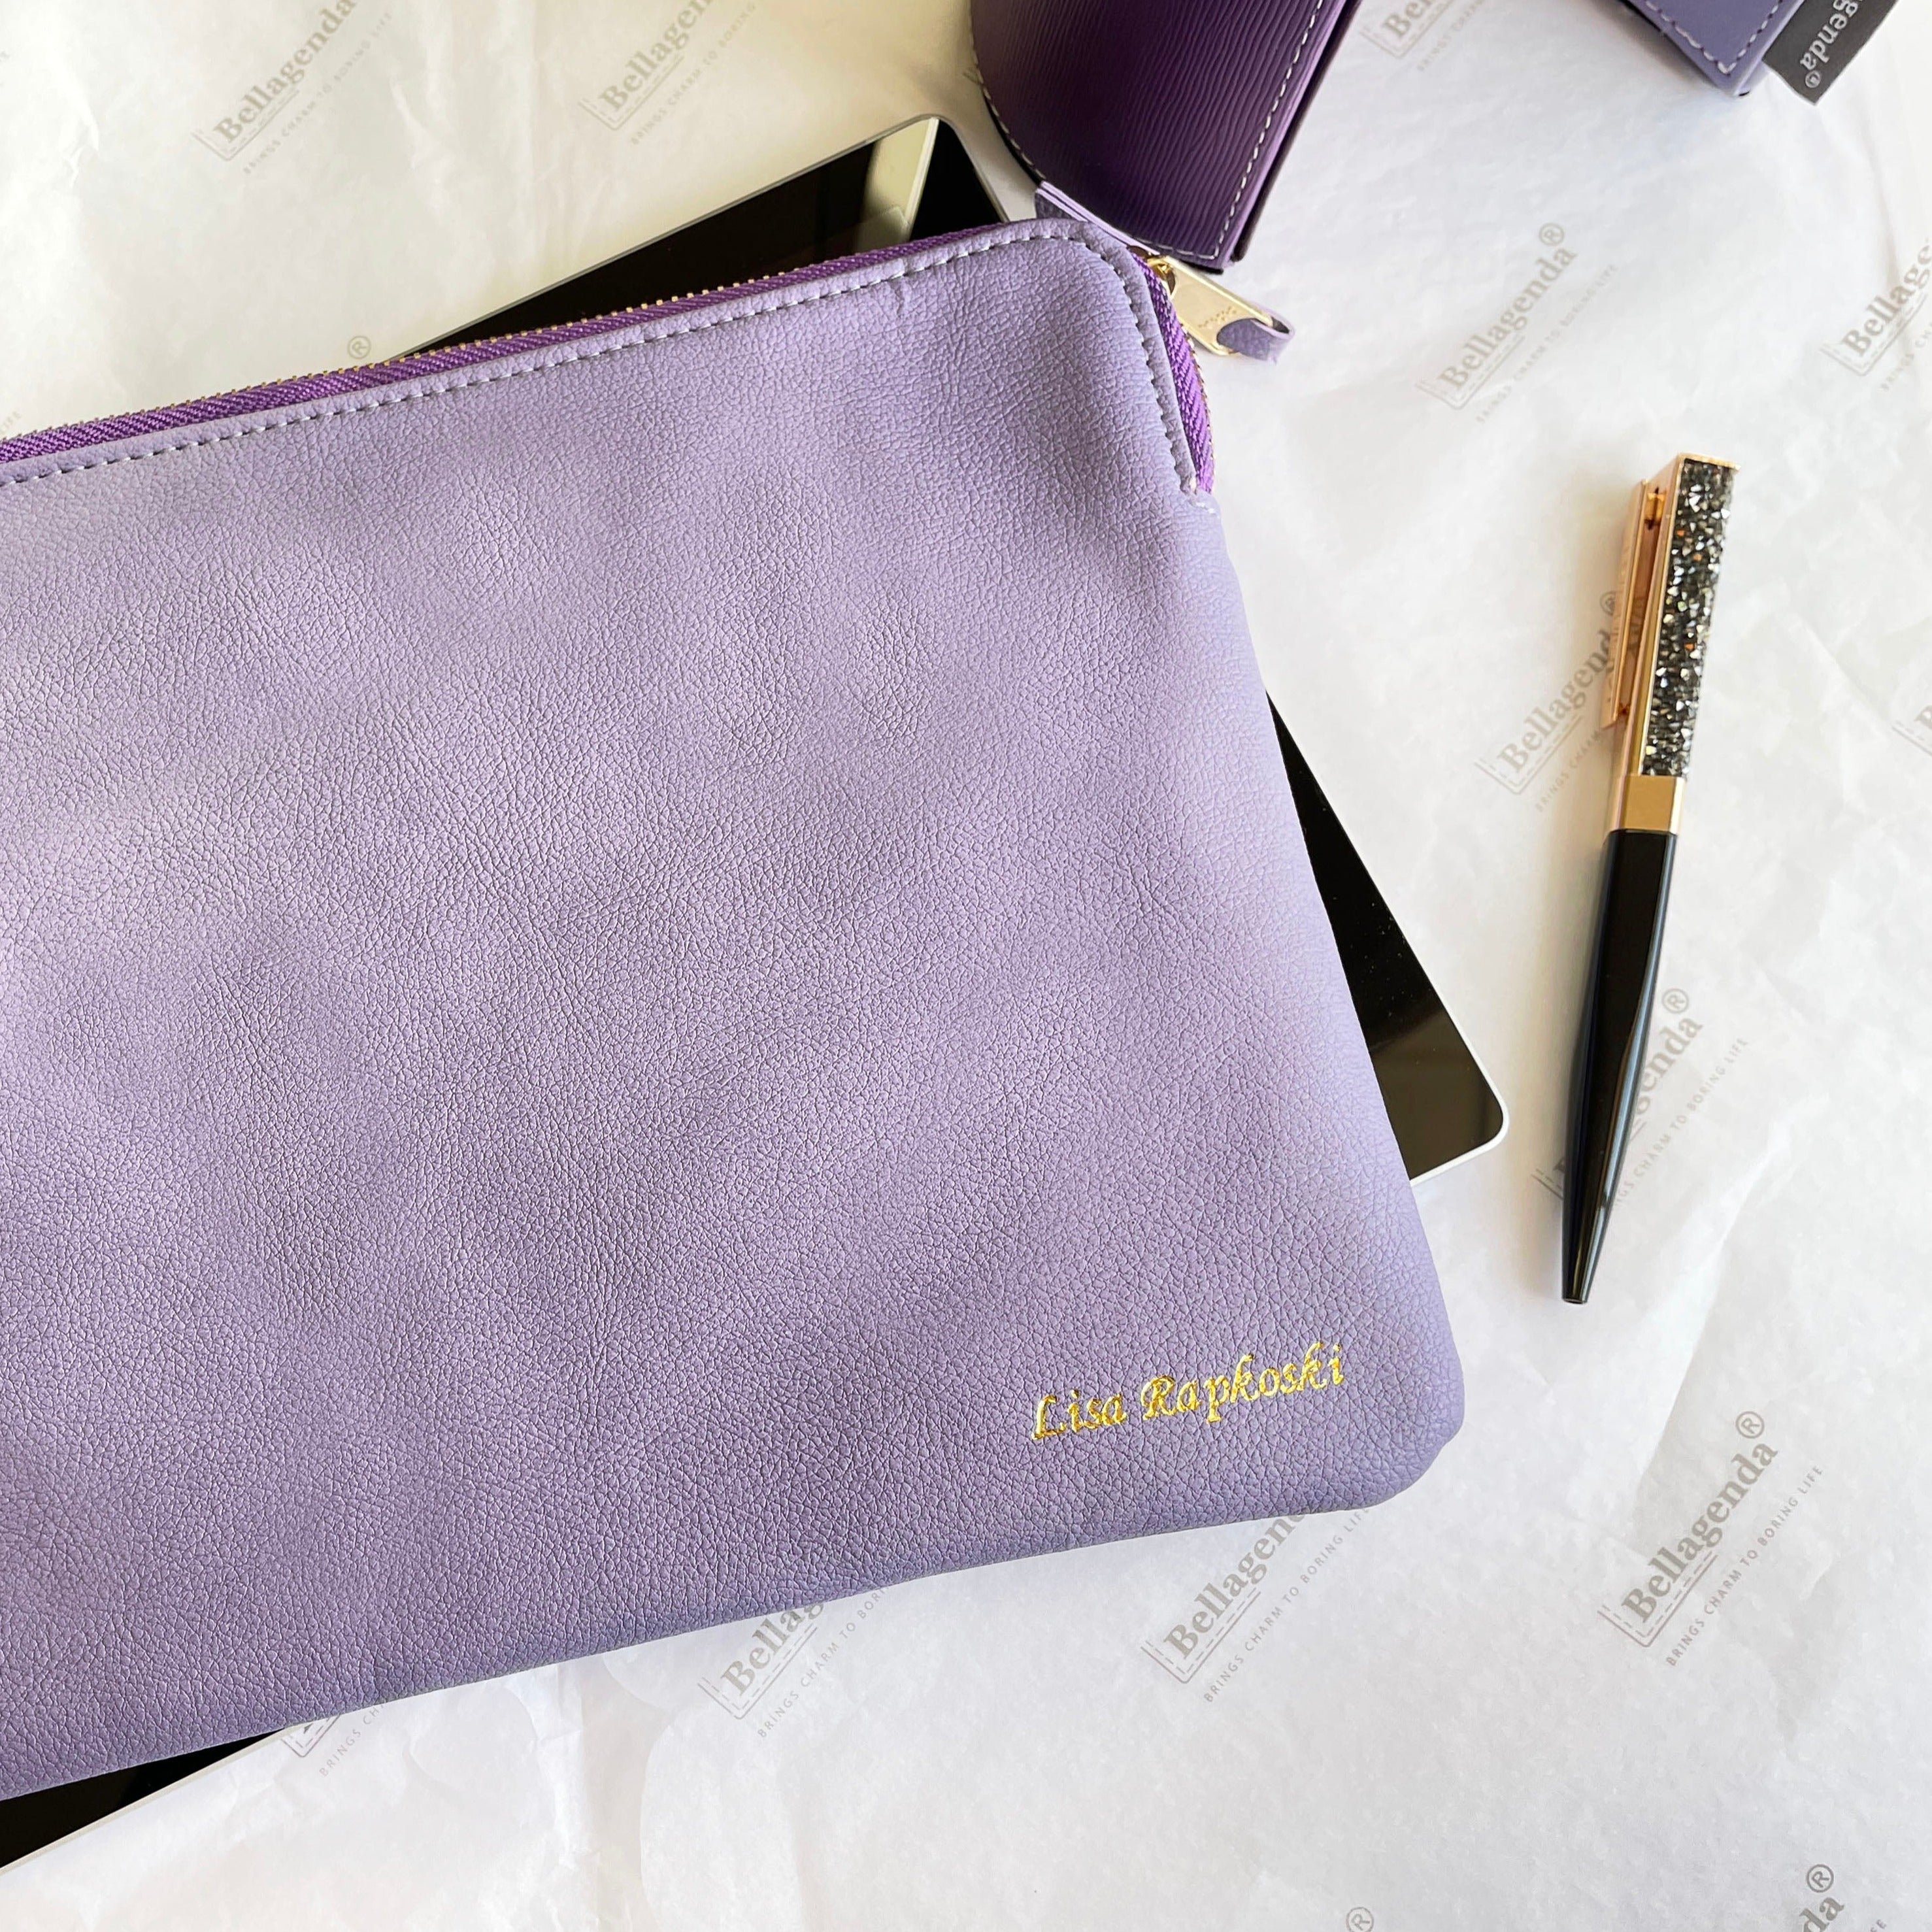 Lavender Grey Tablet sleeve with gold foil personalized